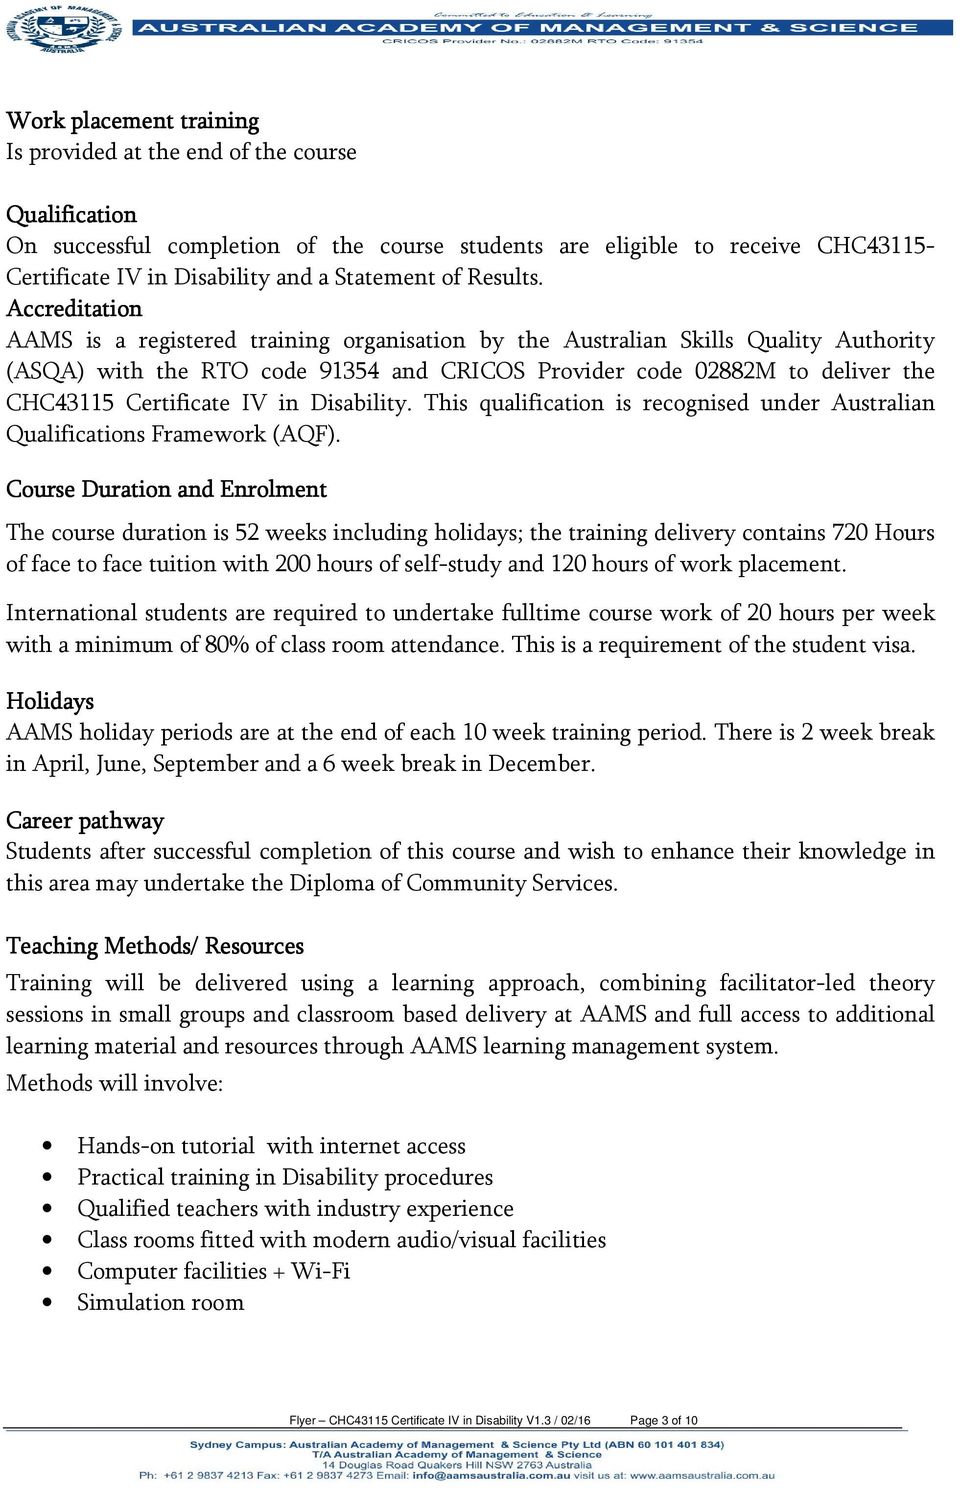 Accreditation AAMS is a registered training organisation by the Australian Skills Quality Authority (ASQA) with the RTO code 91354 and CRICOS Provider code 02882M to deliver the CHC43115 Certificate